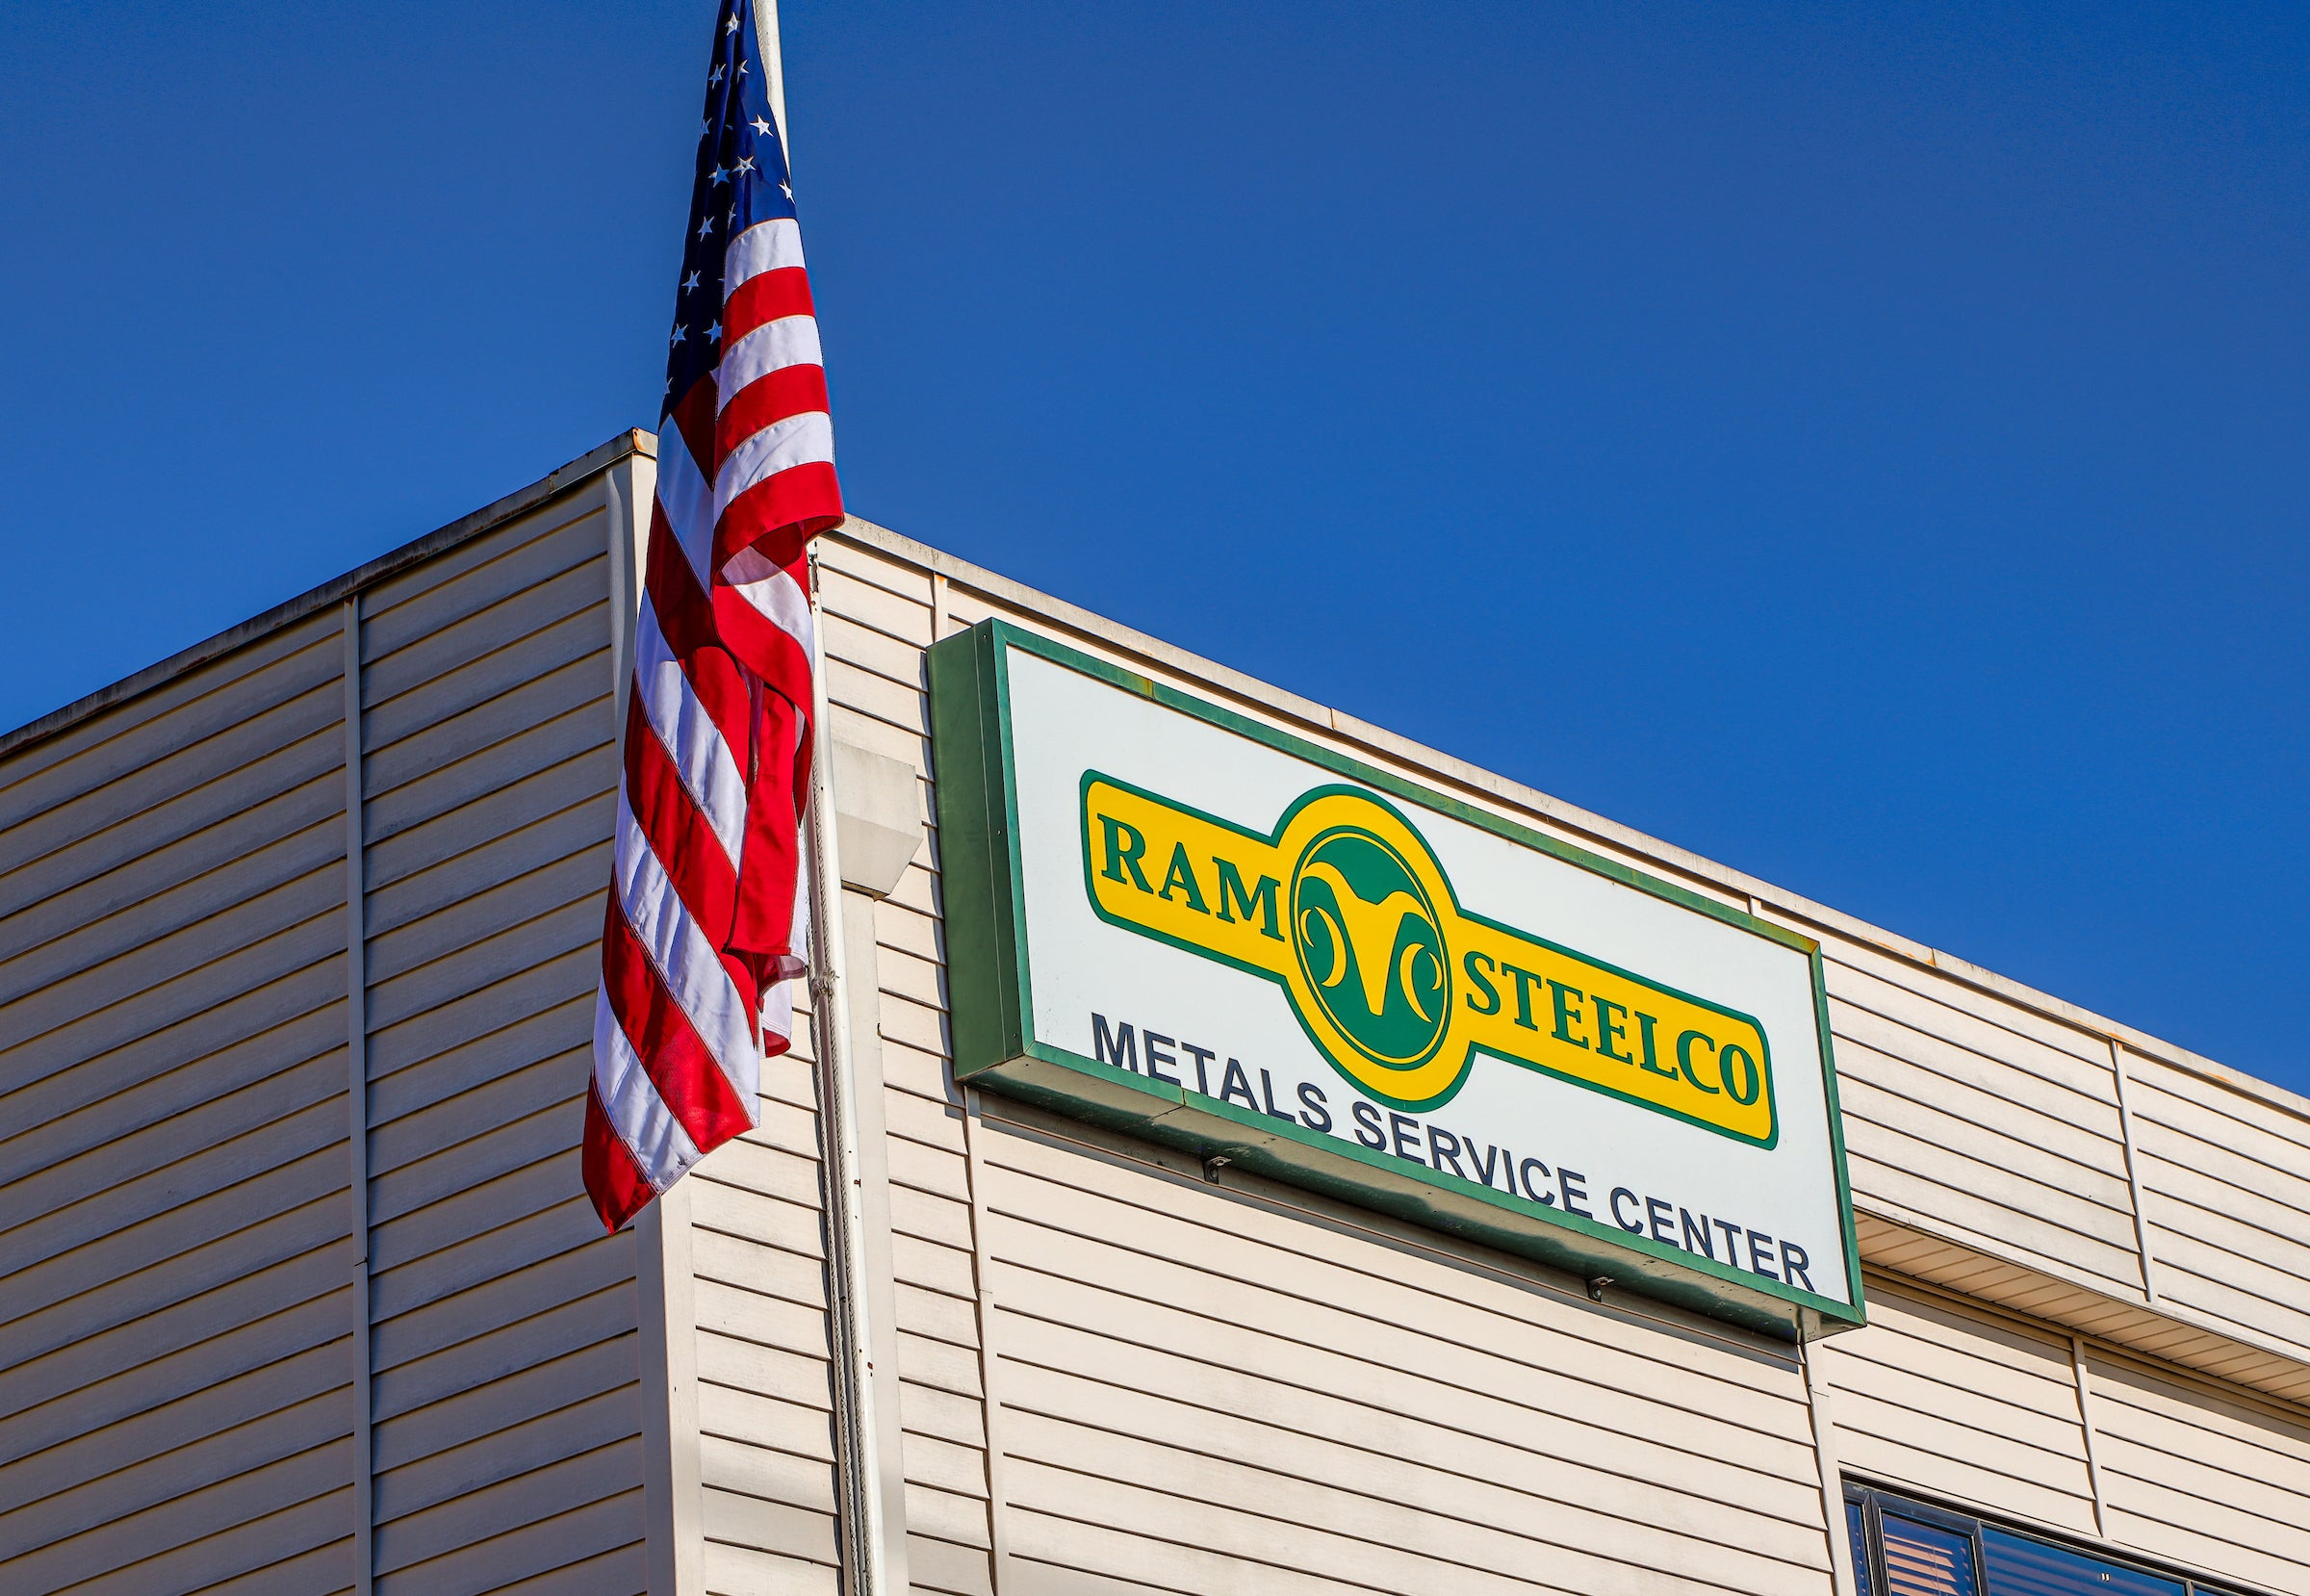 Ram Steelco's warehouse with American flag.